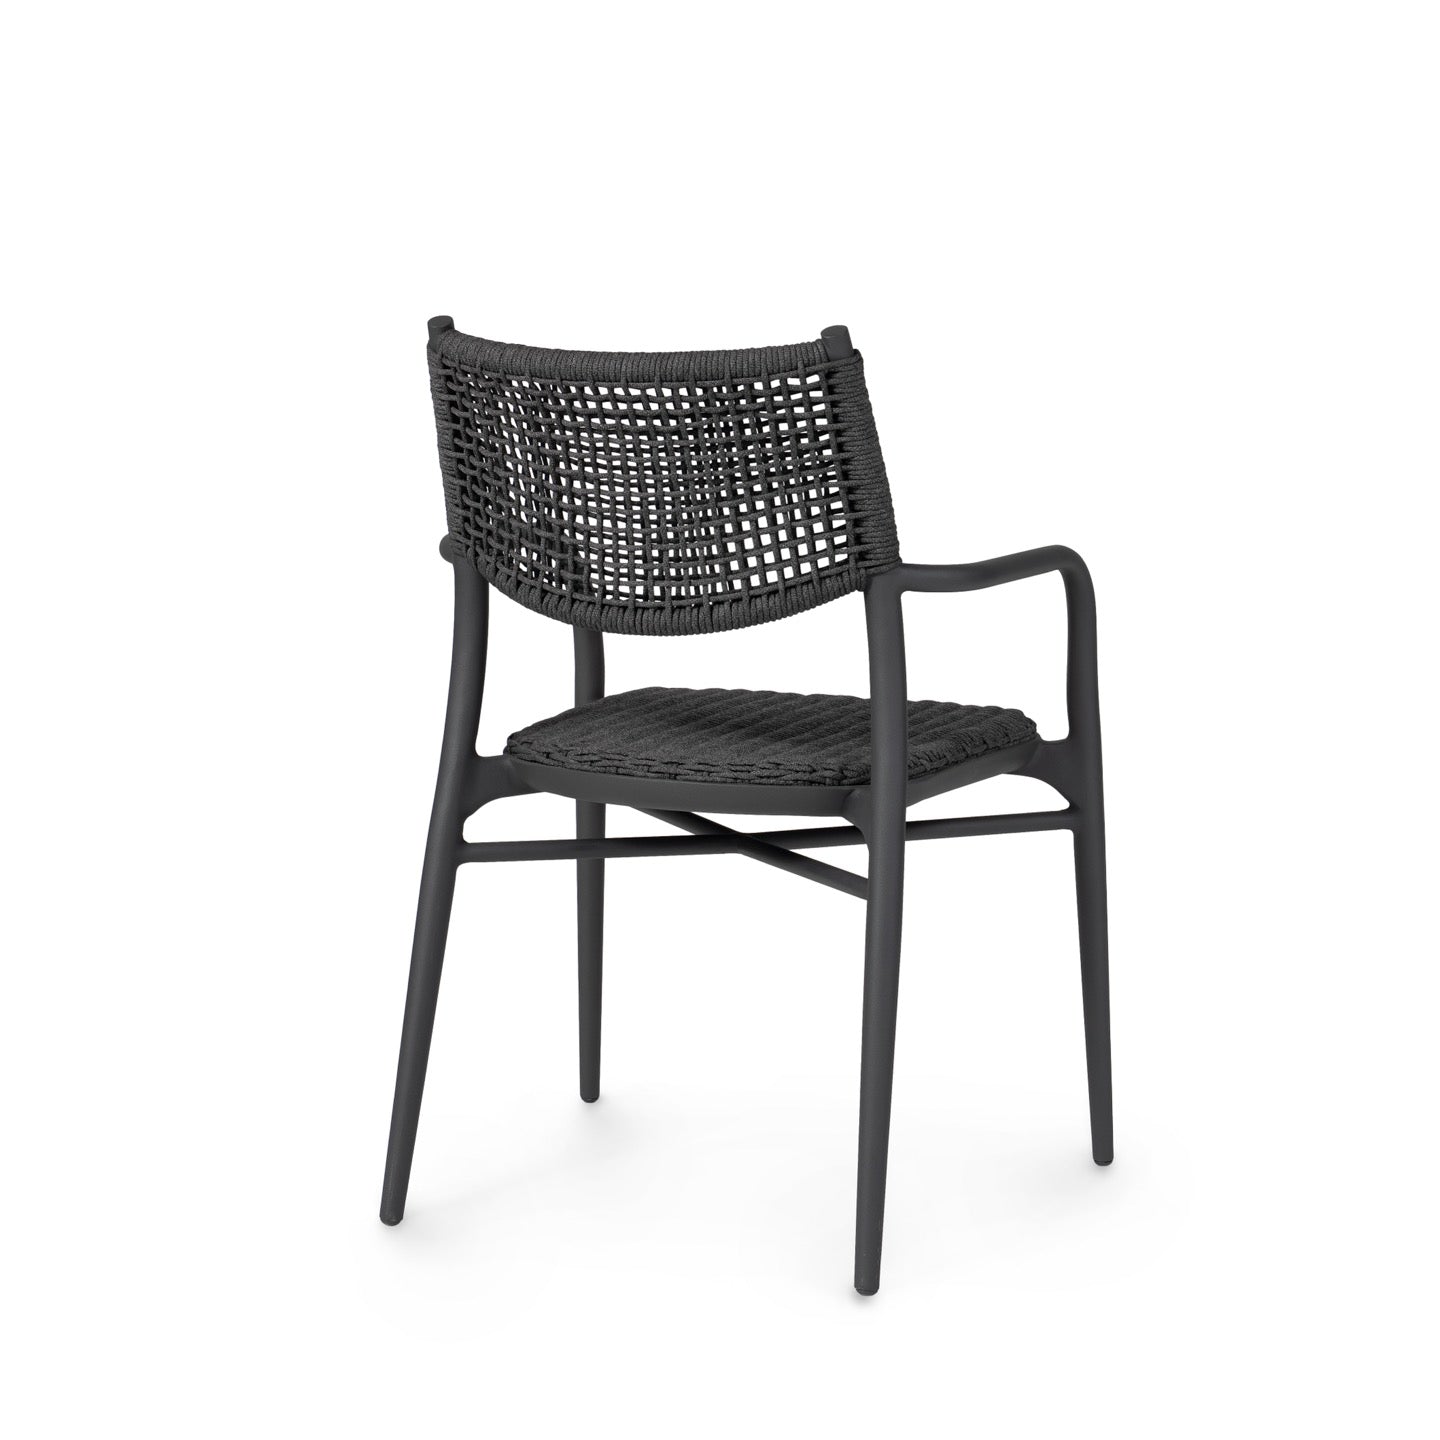 Cody Outdoor Stackable Arm Chair Midnight